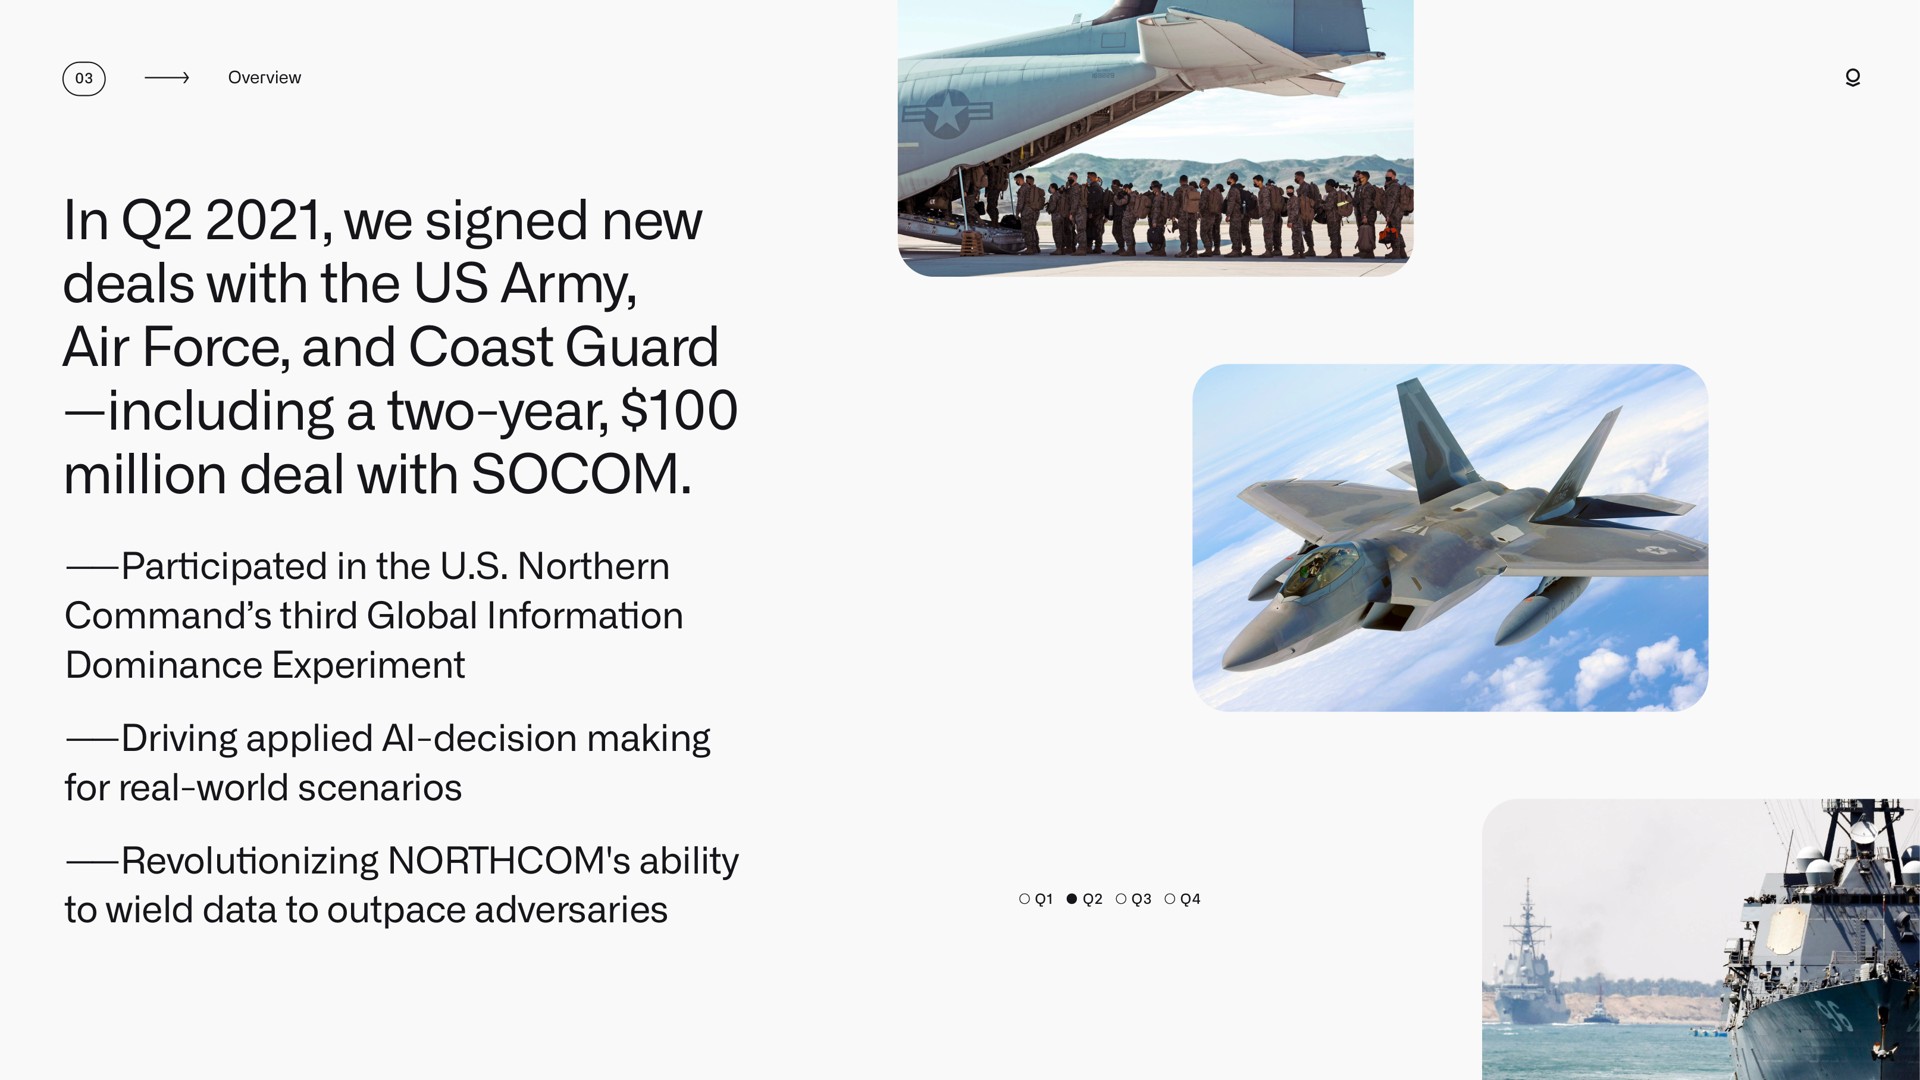 in we signed new deals with the us army air force and coast guard including a two year million deal with par in the northern command third global information dominance experiment driving applied decision making for real world scenarios ability to wield data to outpace adversaries participated decision revolutionizing dig i | Palantir